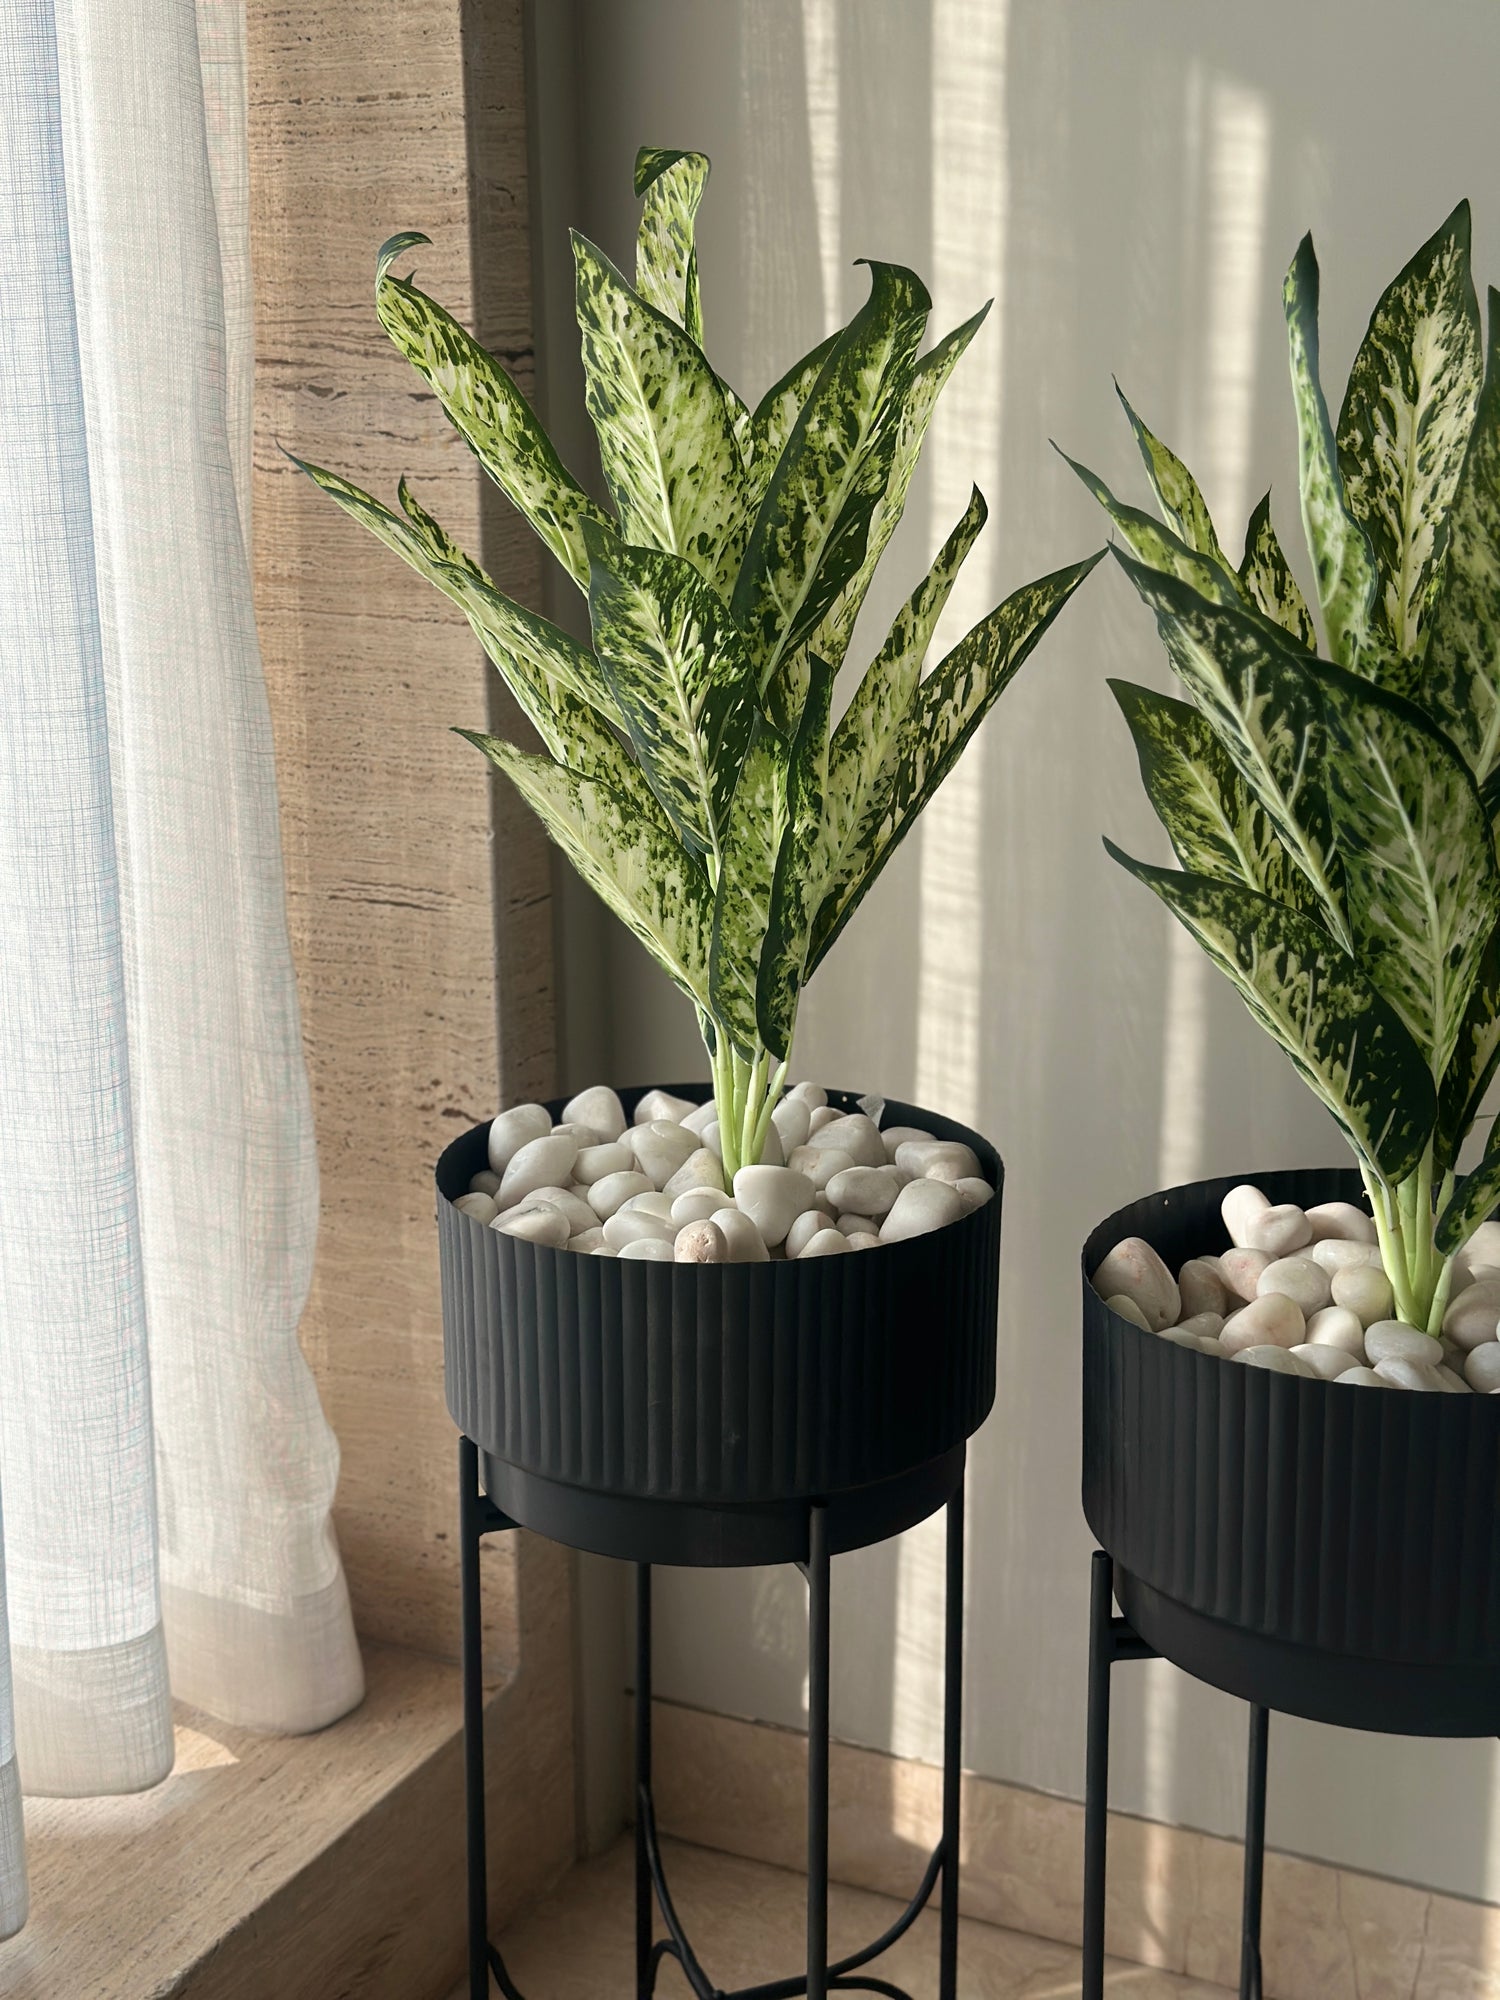 Beverly Fluted Planter (Set of 2) - Charcoal